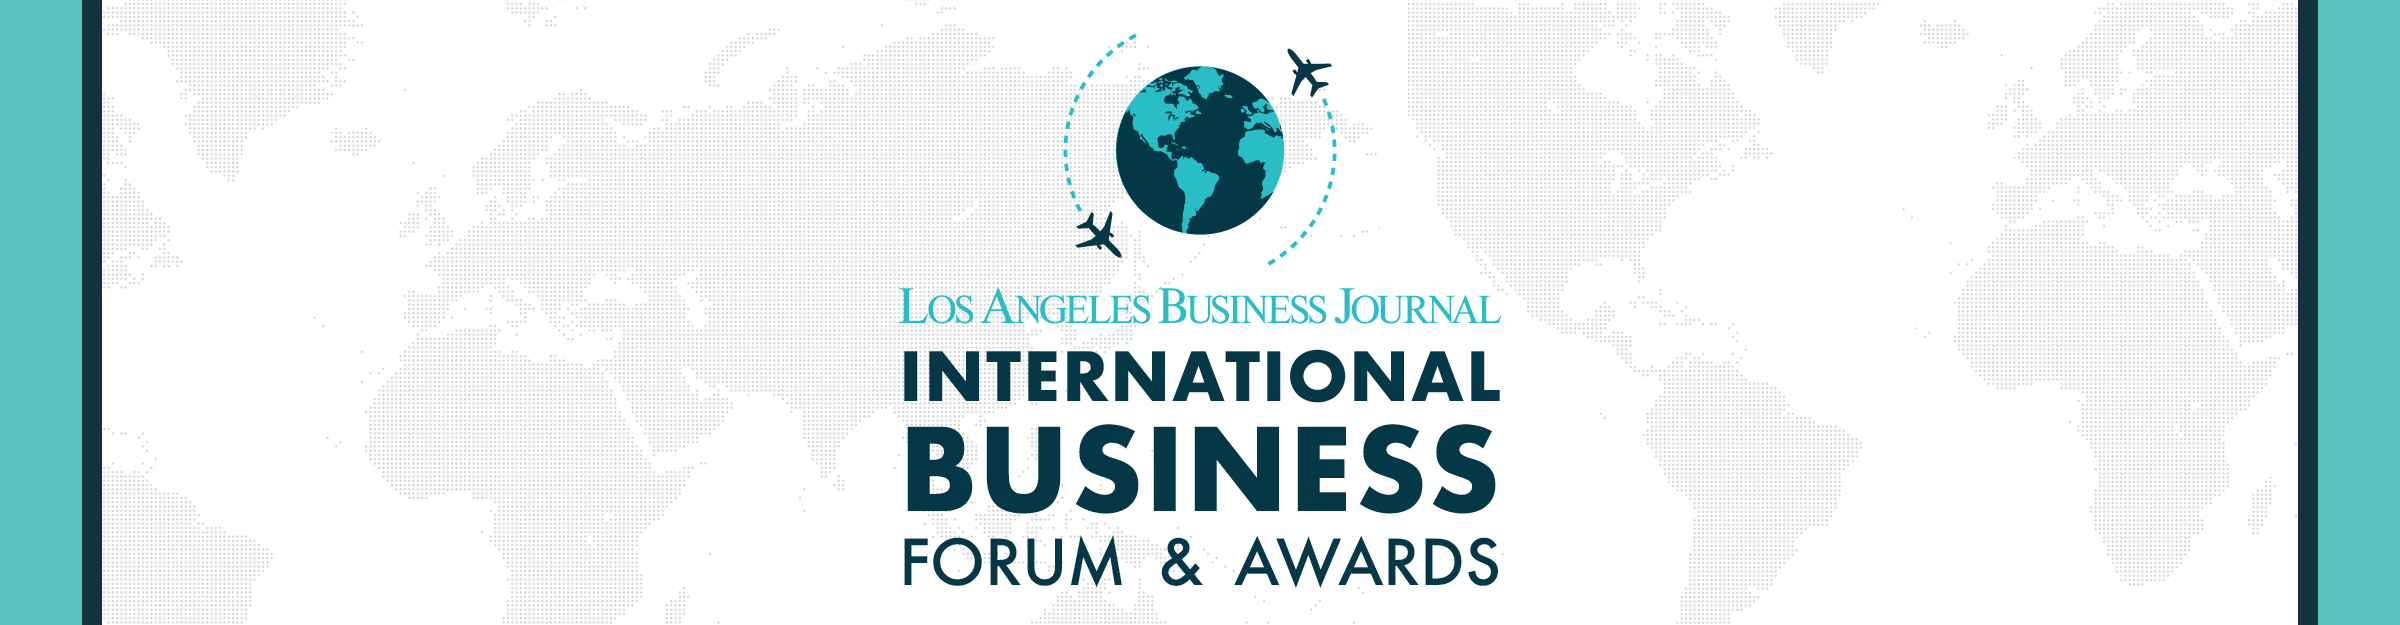 Los Angeles Business Journal International Business Forum and Awards Event Banner